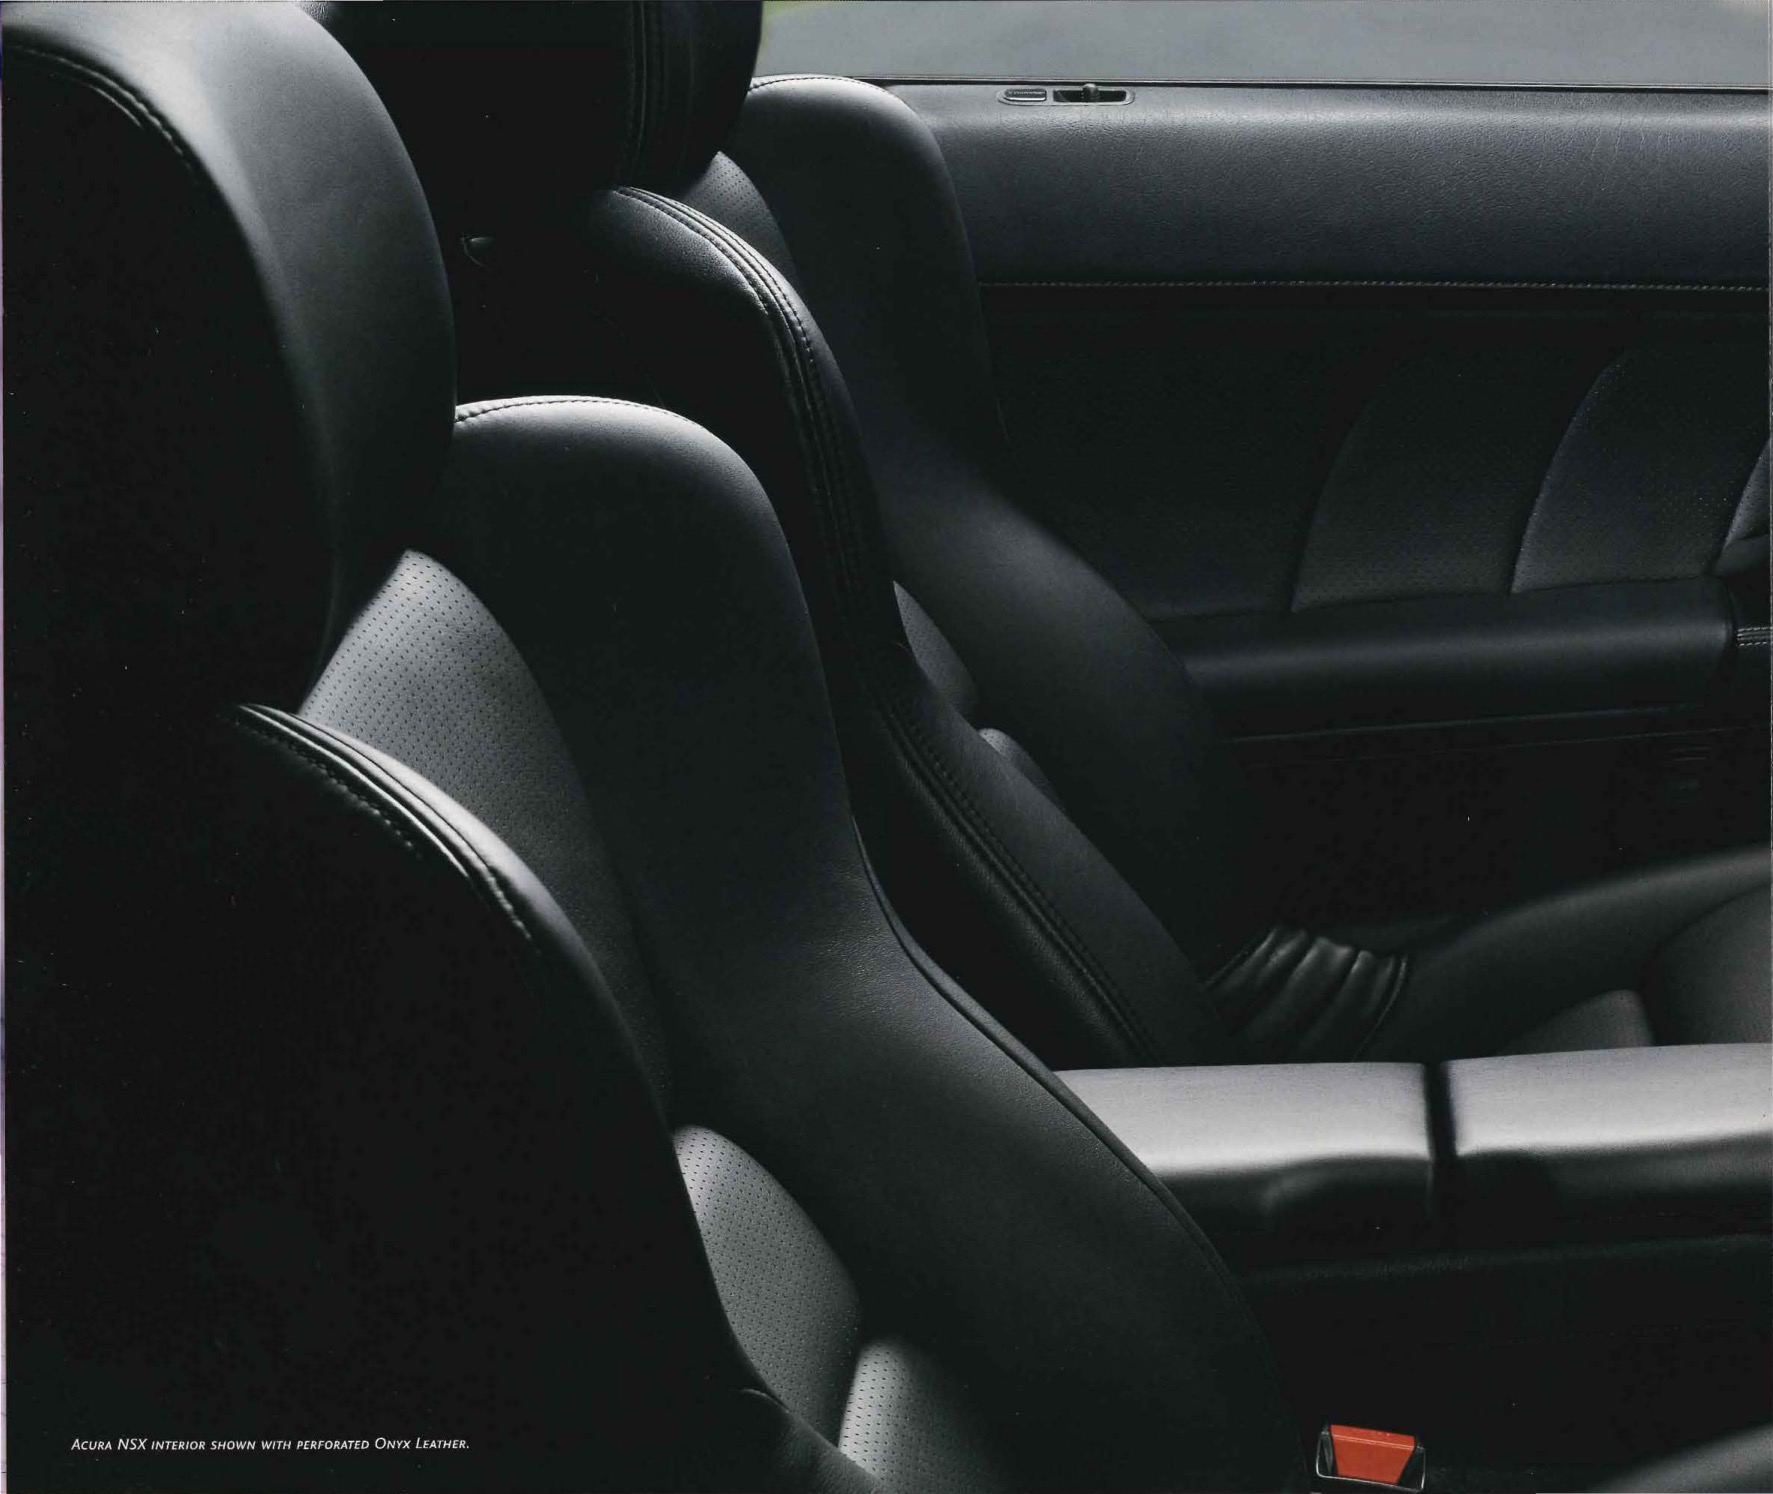 2002 Acura NSX Brochure Page 10